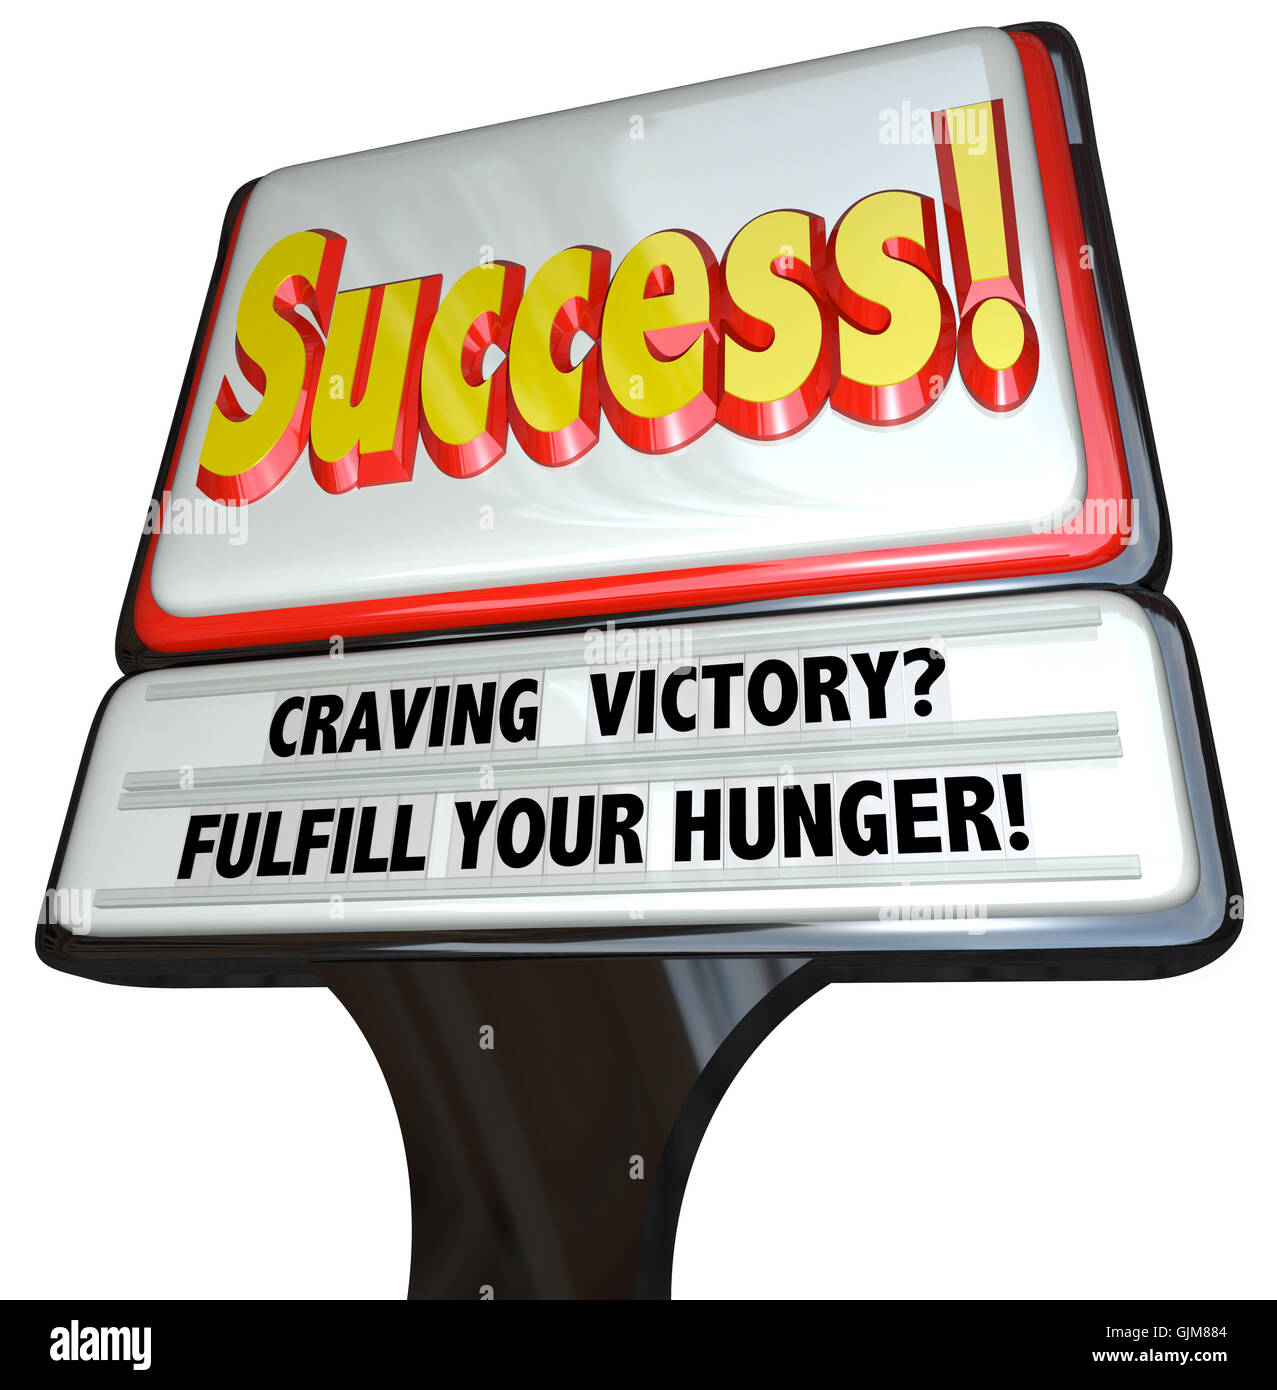 Success Sign - Craving Victory Fulfill Hunger Stock Photo